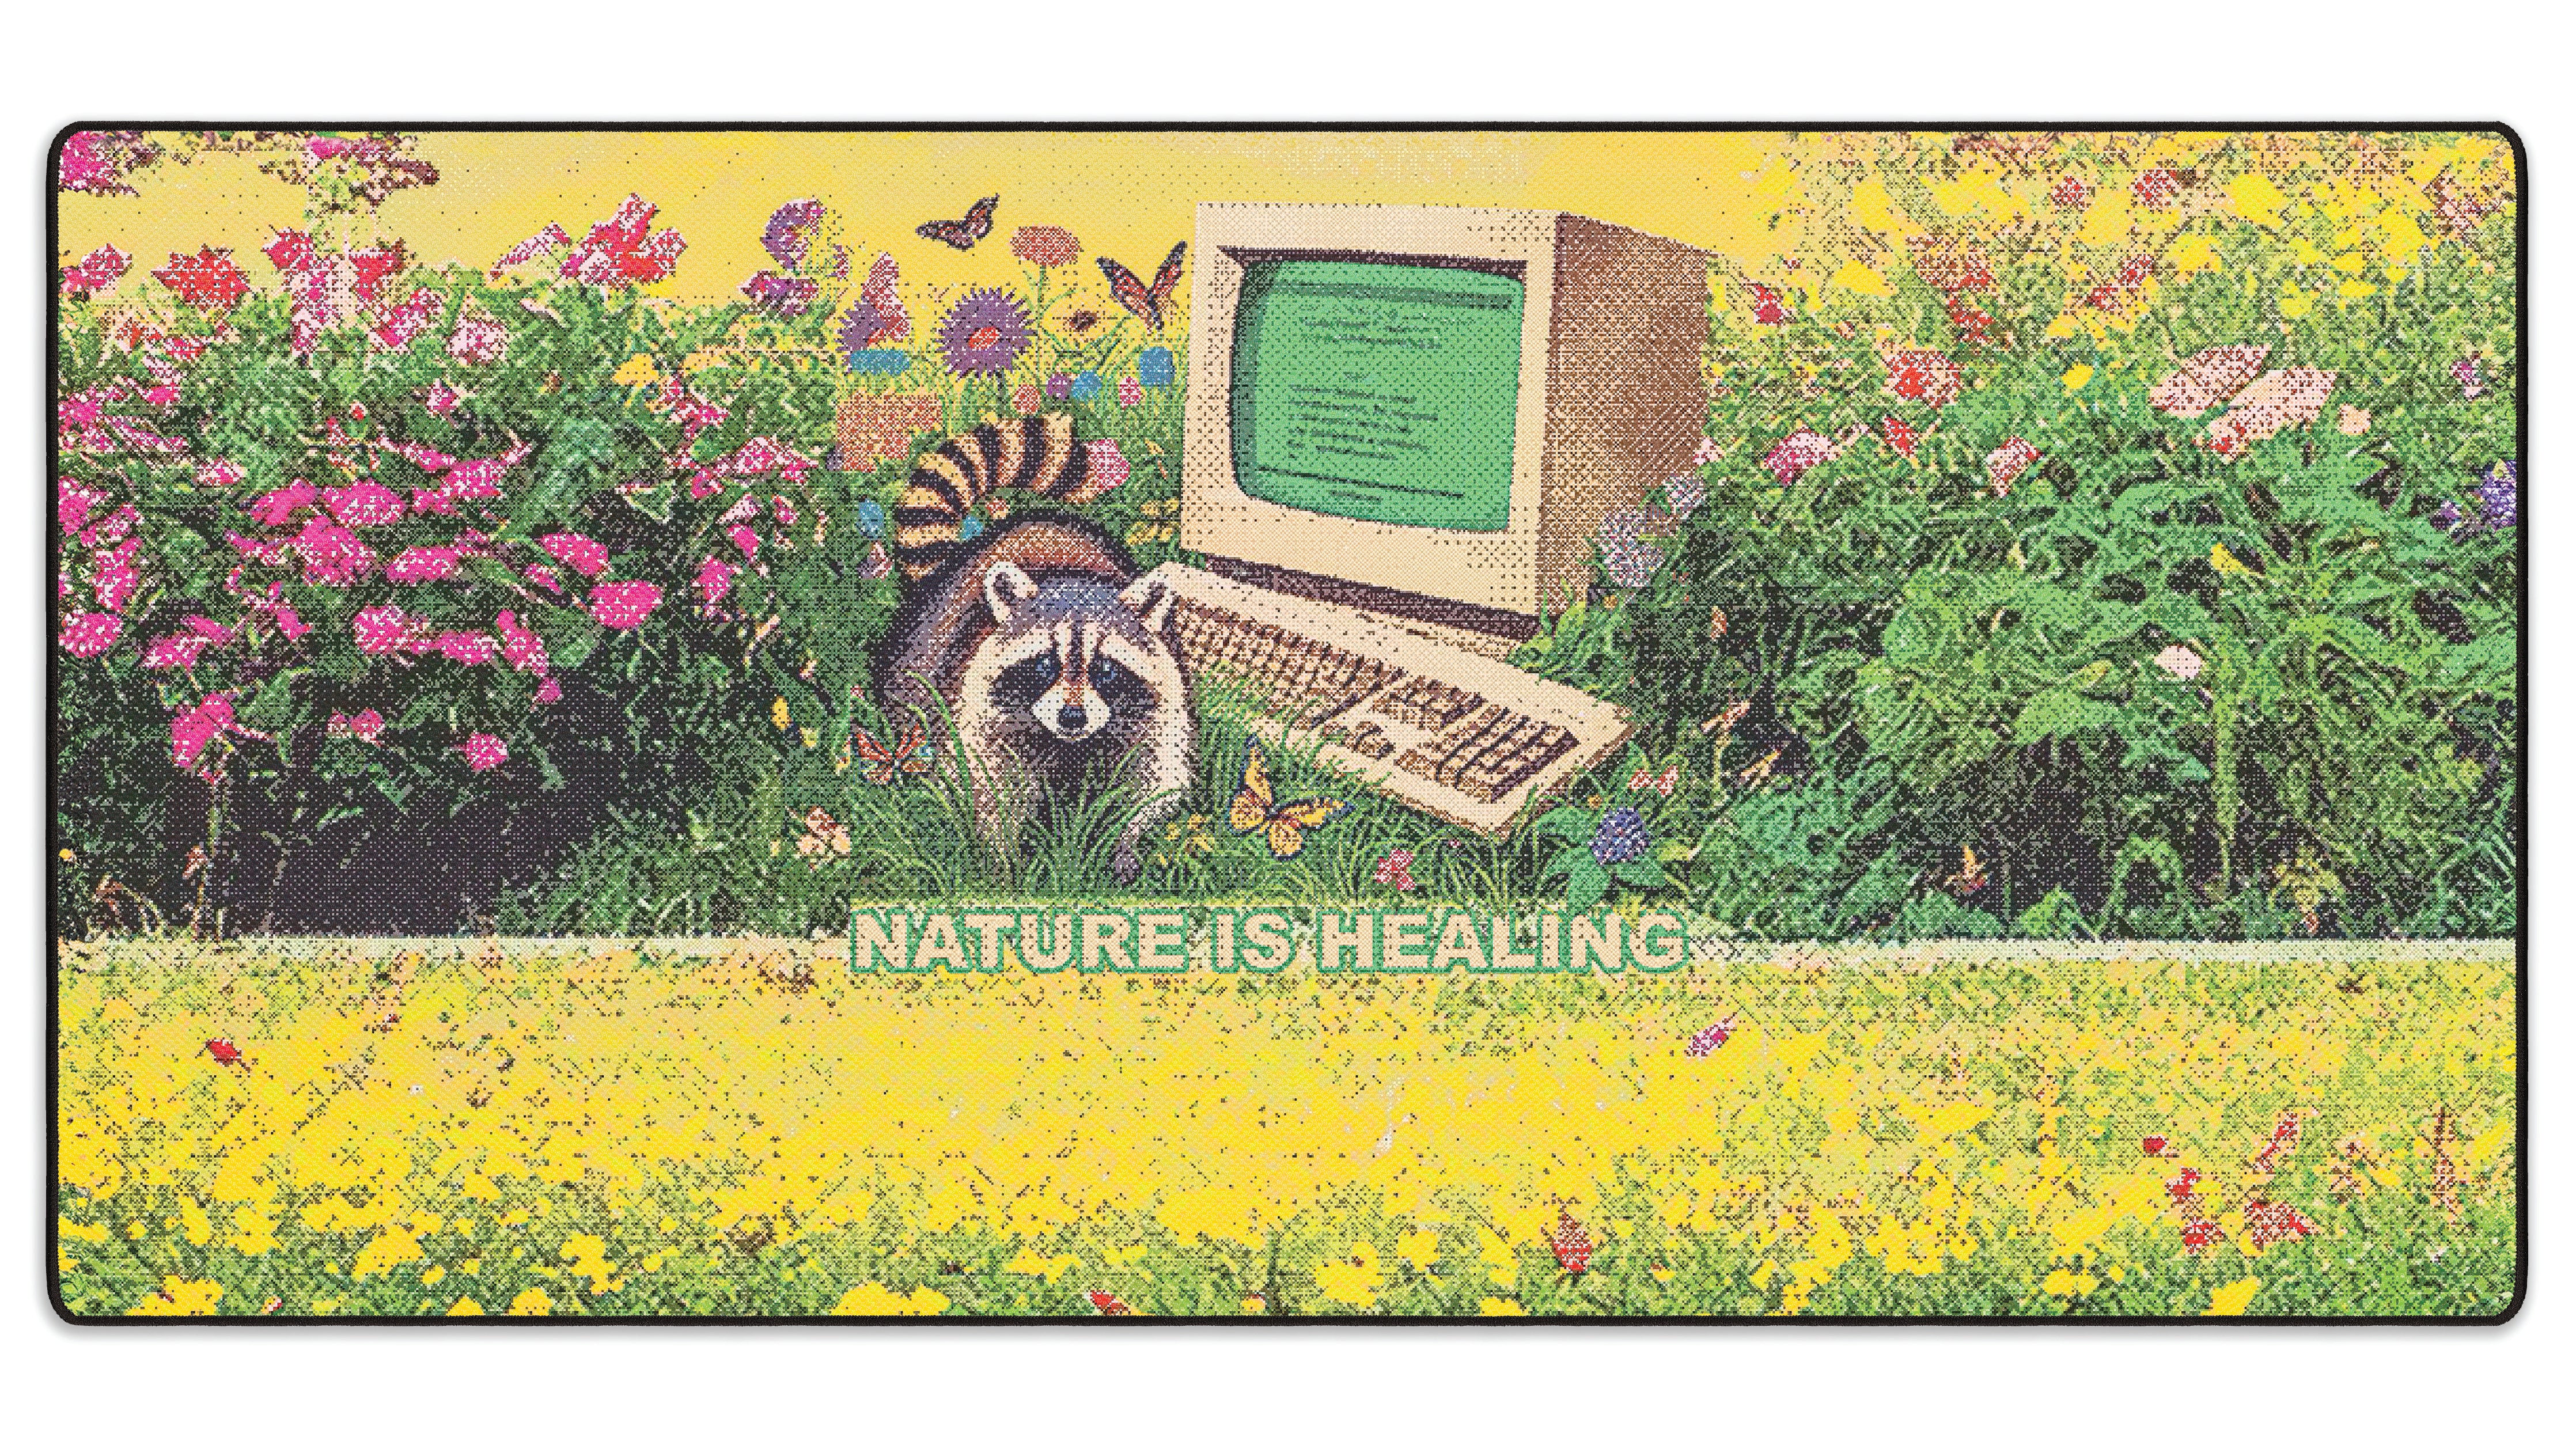 Nature is Healing, by Dogecore - The Mousepad Company